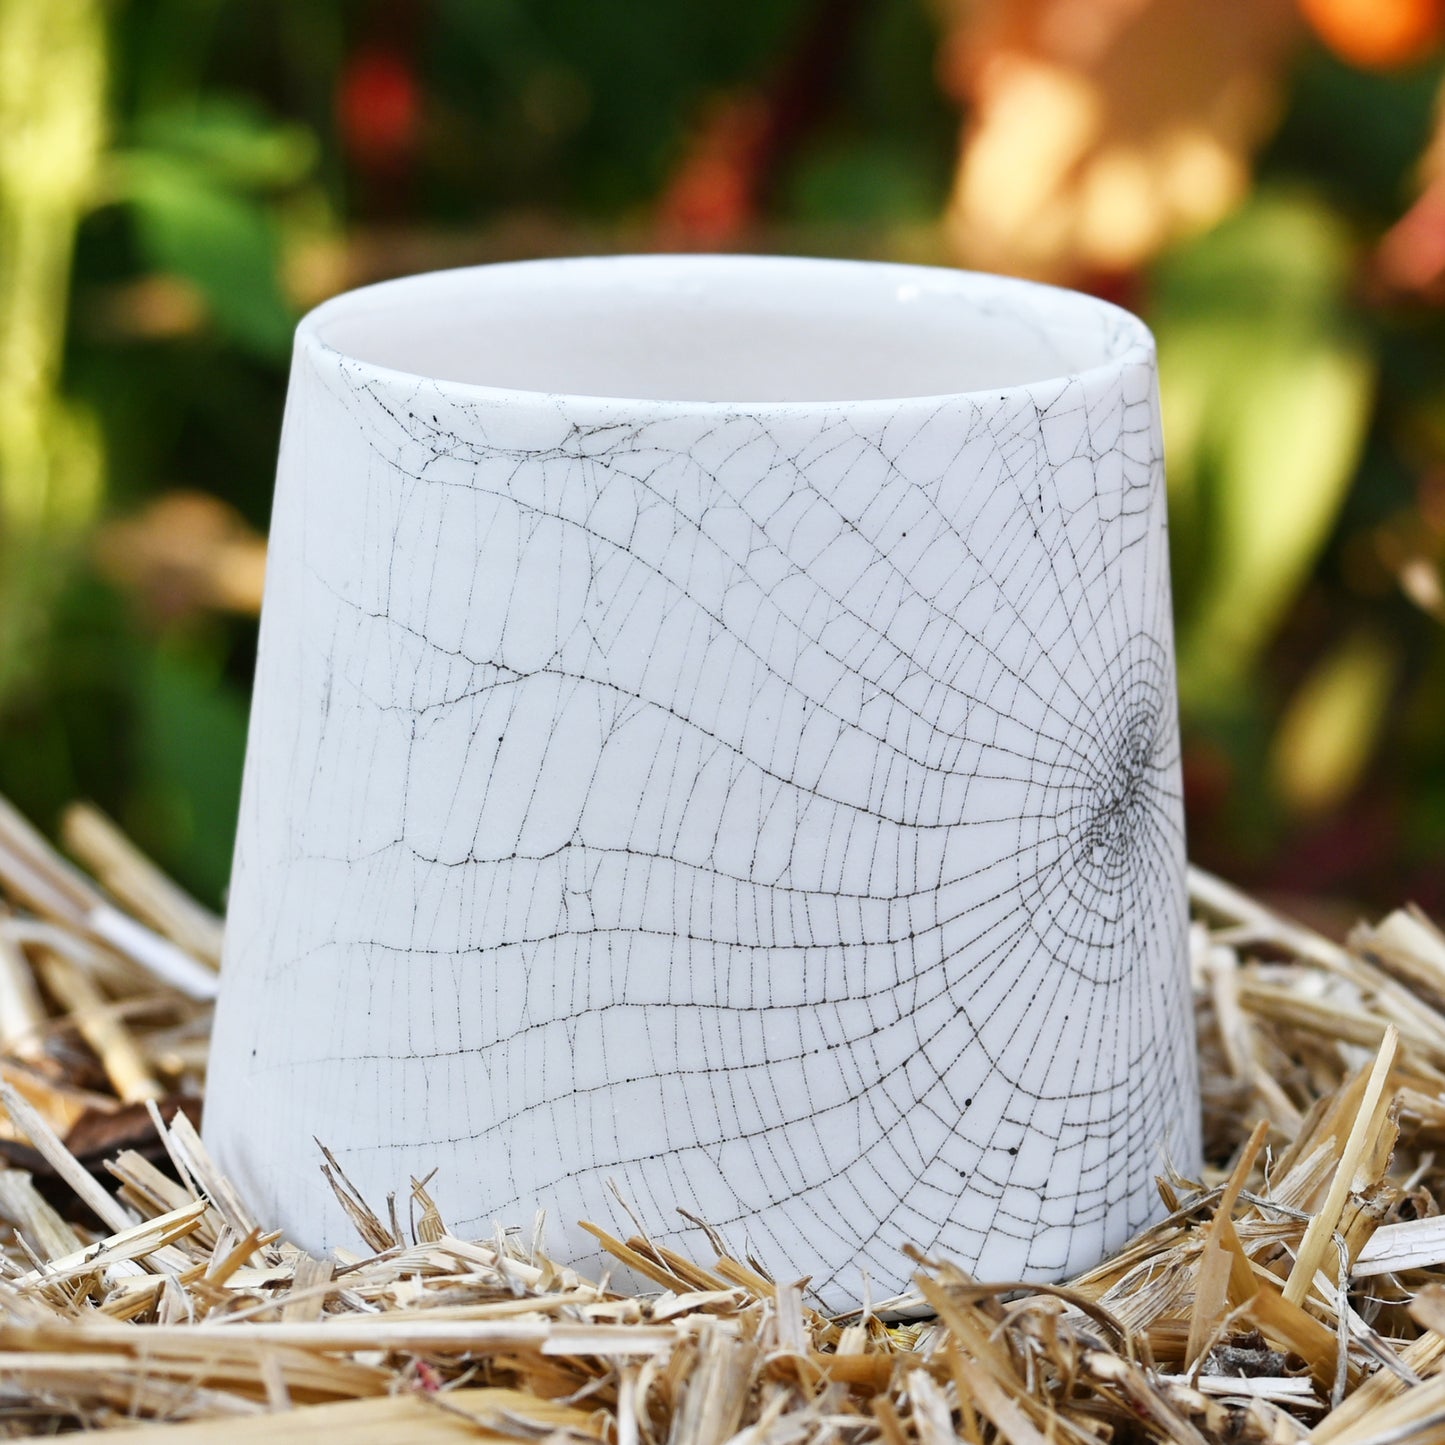 Web On Clay (280),  Webs Collected August 16, 2022